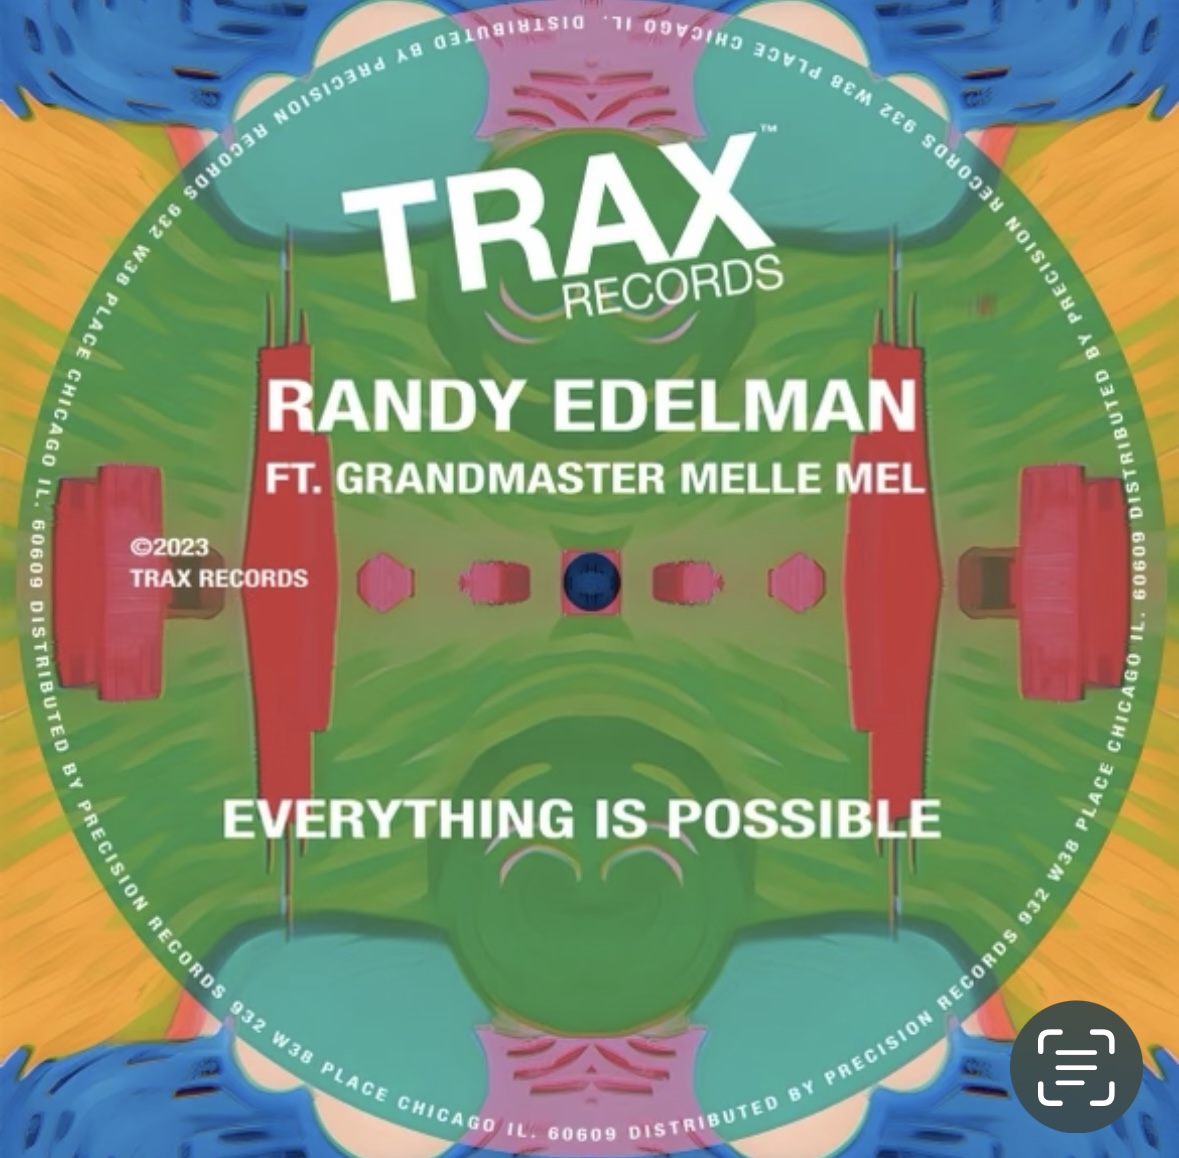 Trax Records The Iconic Label Delivers The Message: "Everything Is Possible" Randy Edelman Featuring Grandmaster Melle Mel and Announces The New Manager Of Rap & Hip House A&R 